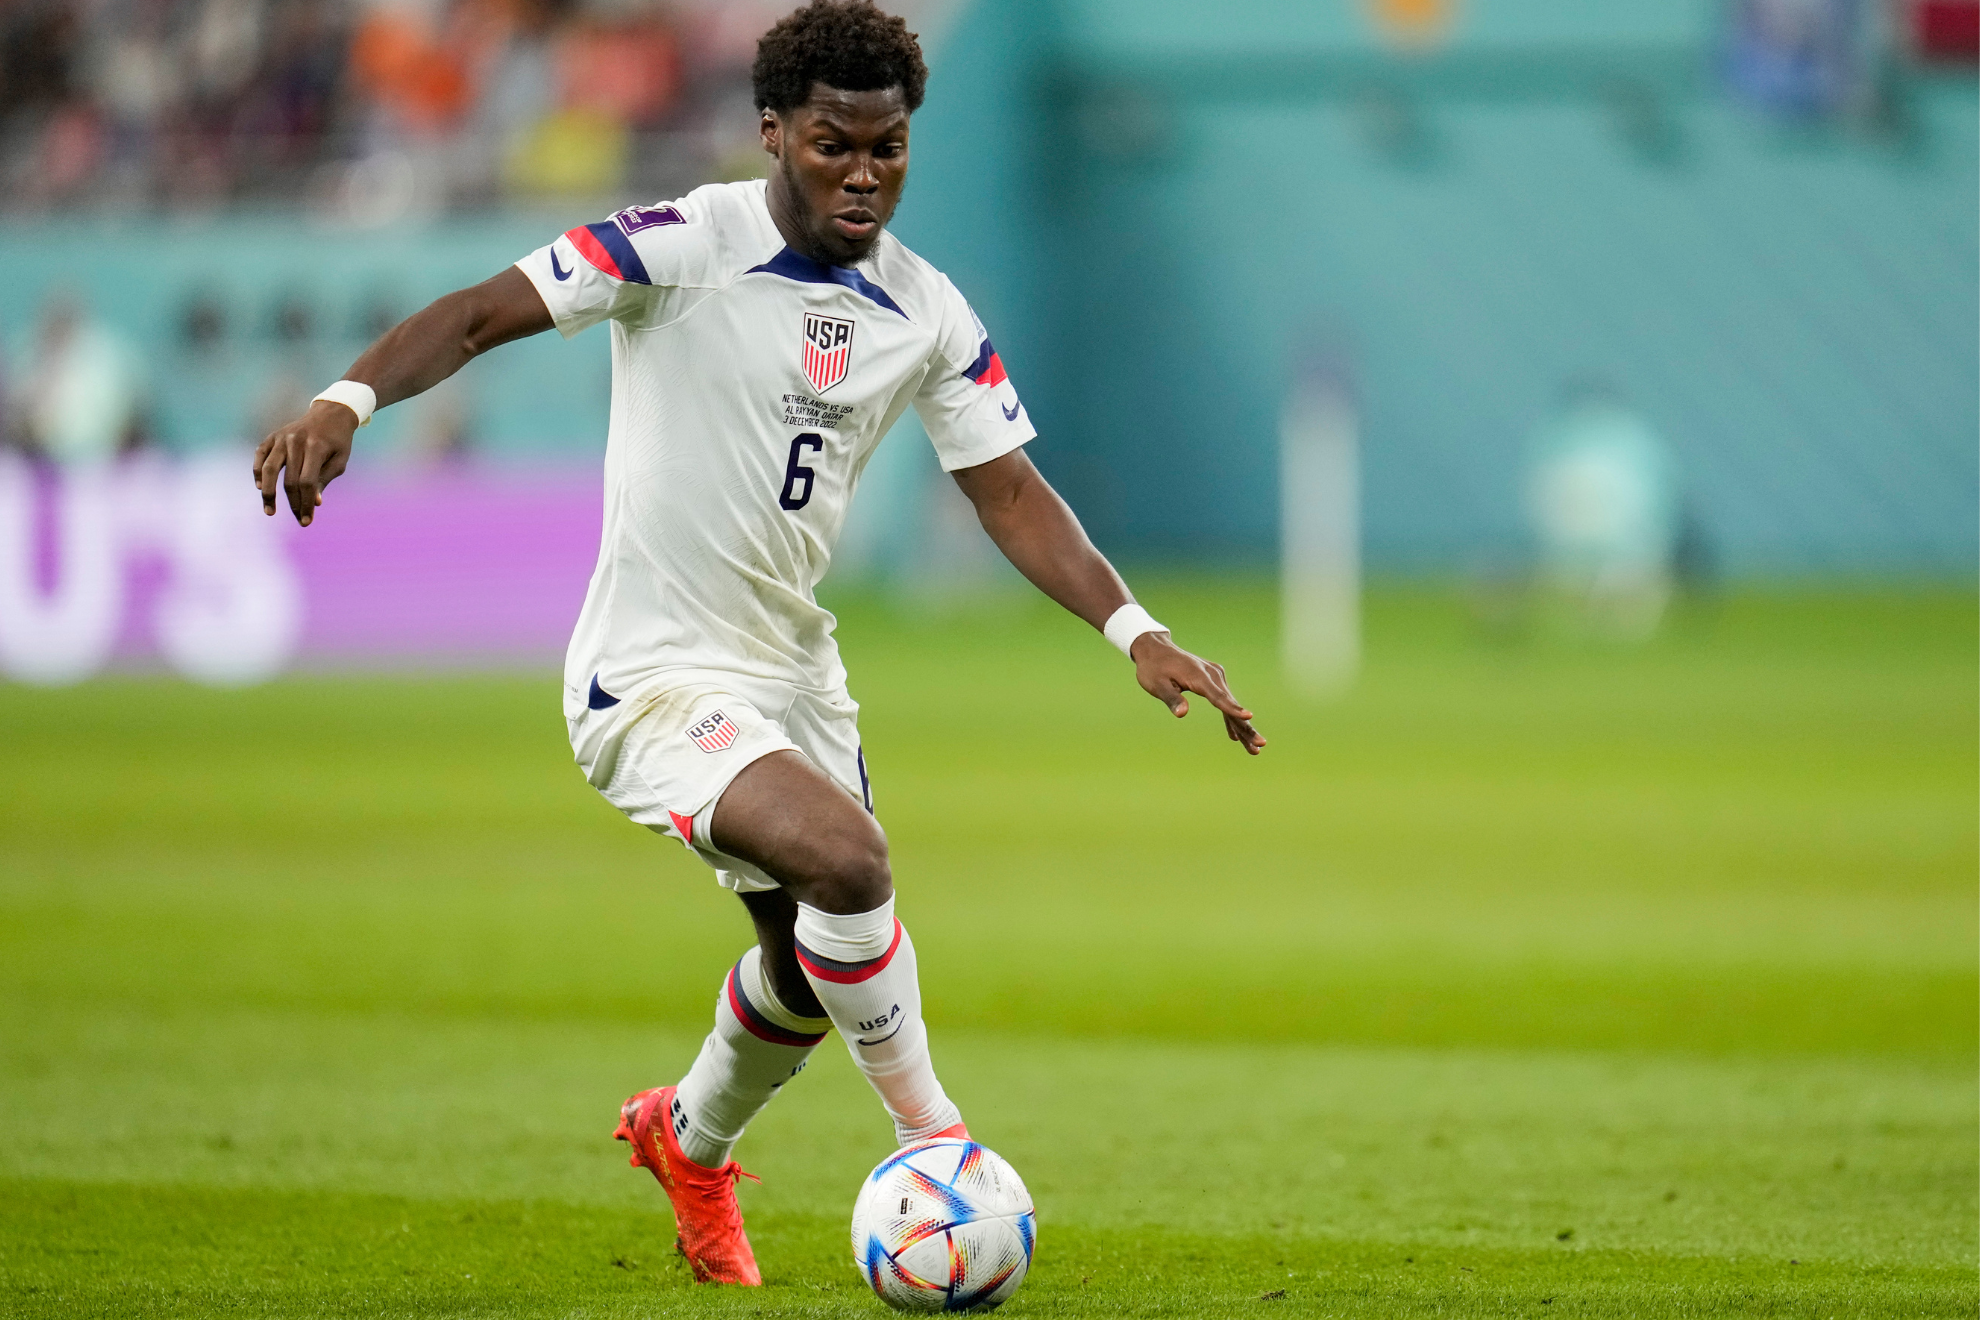 Musah has made 25 appearances for the US national team.